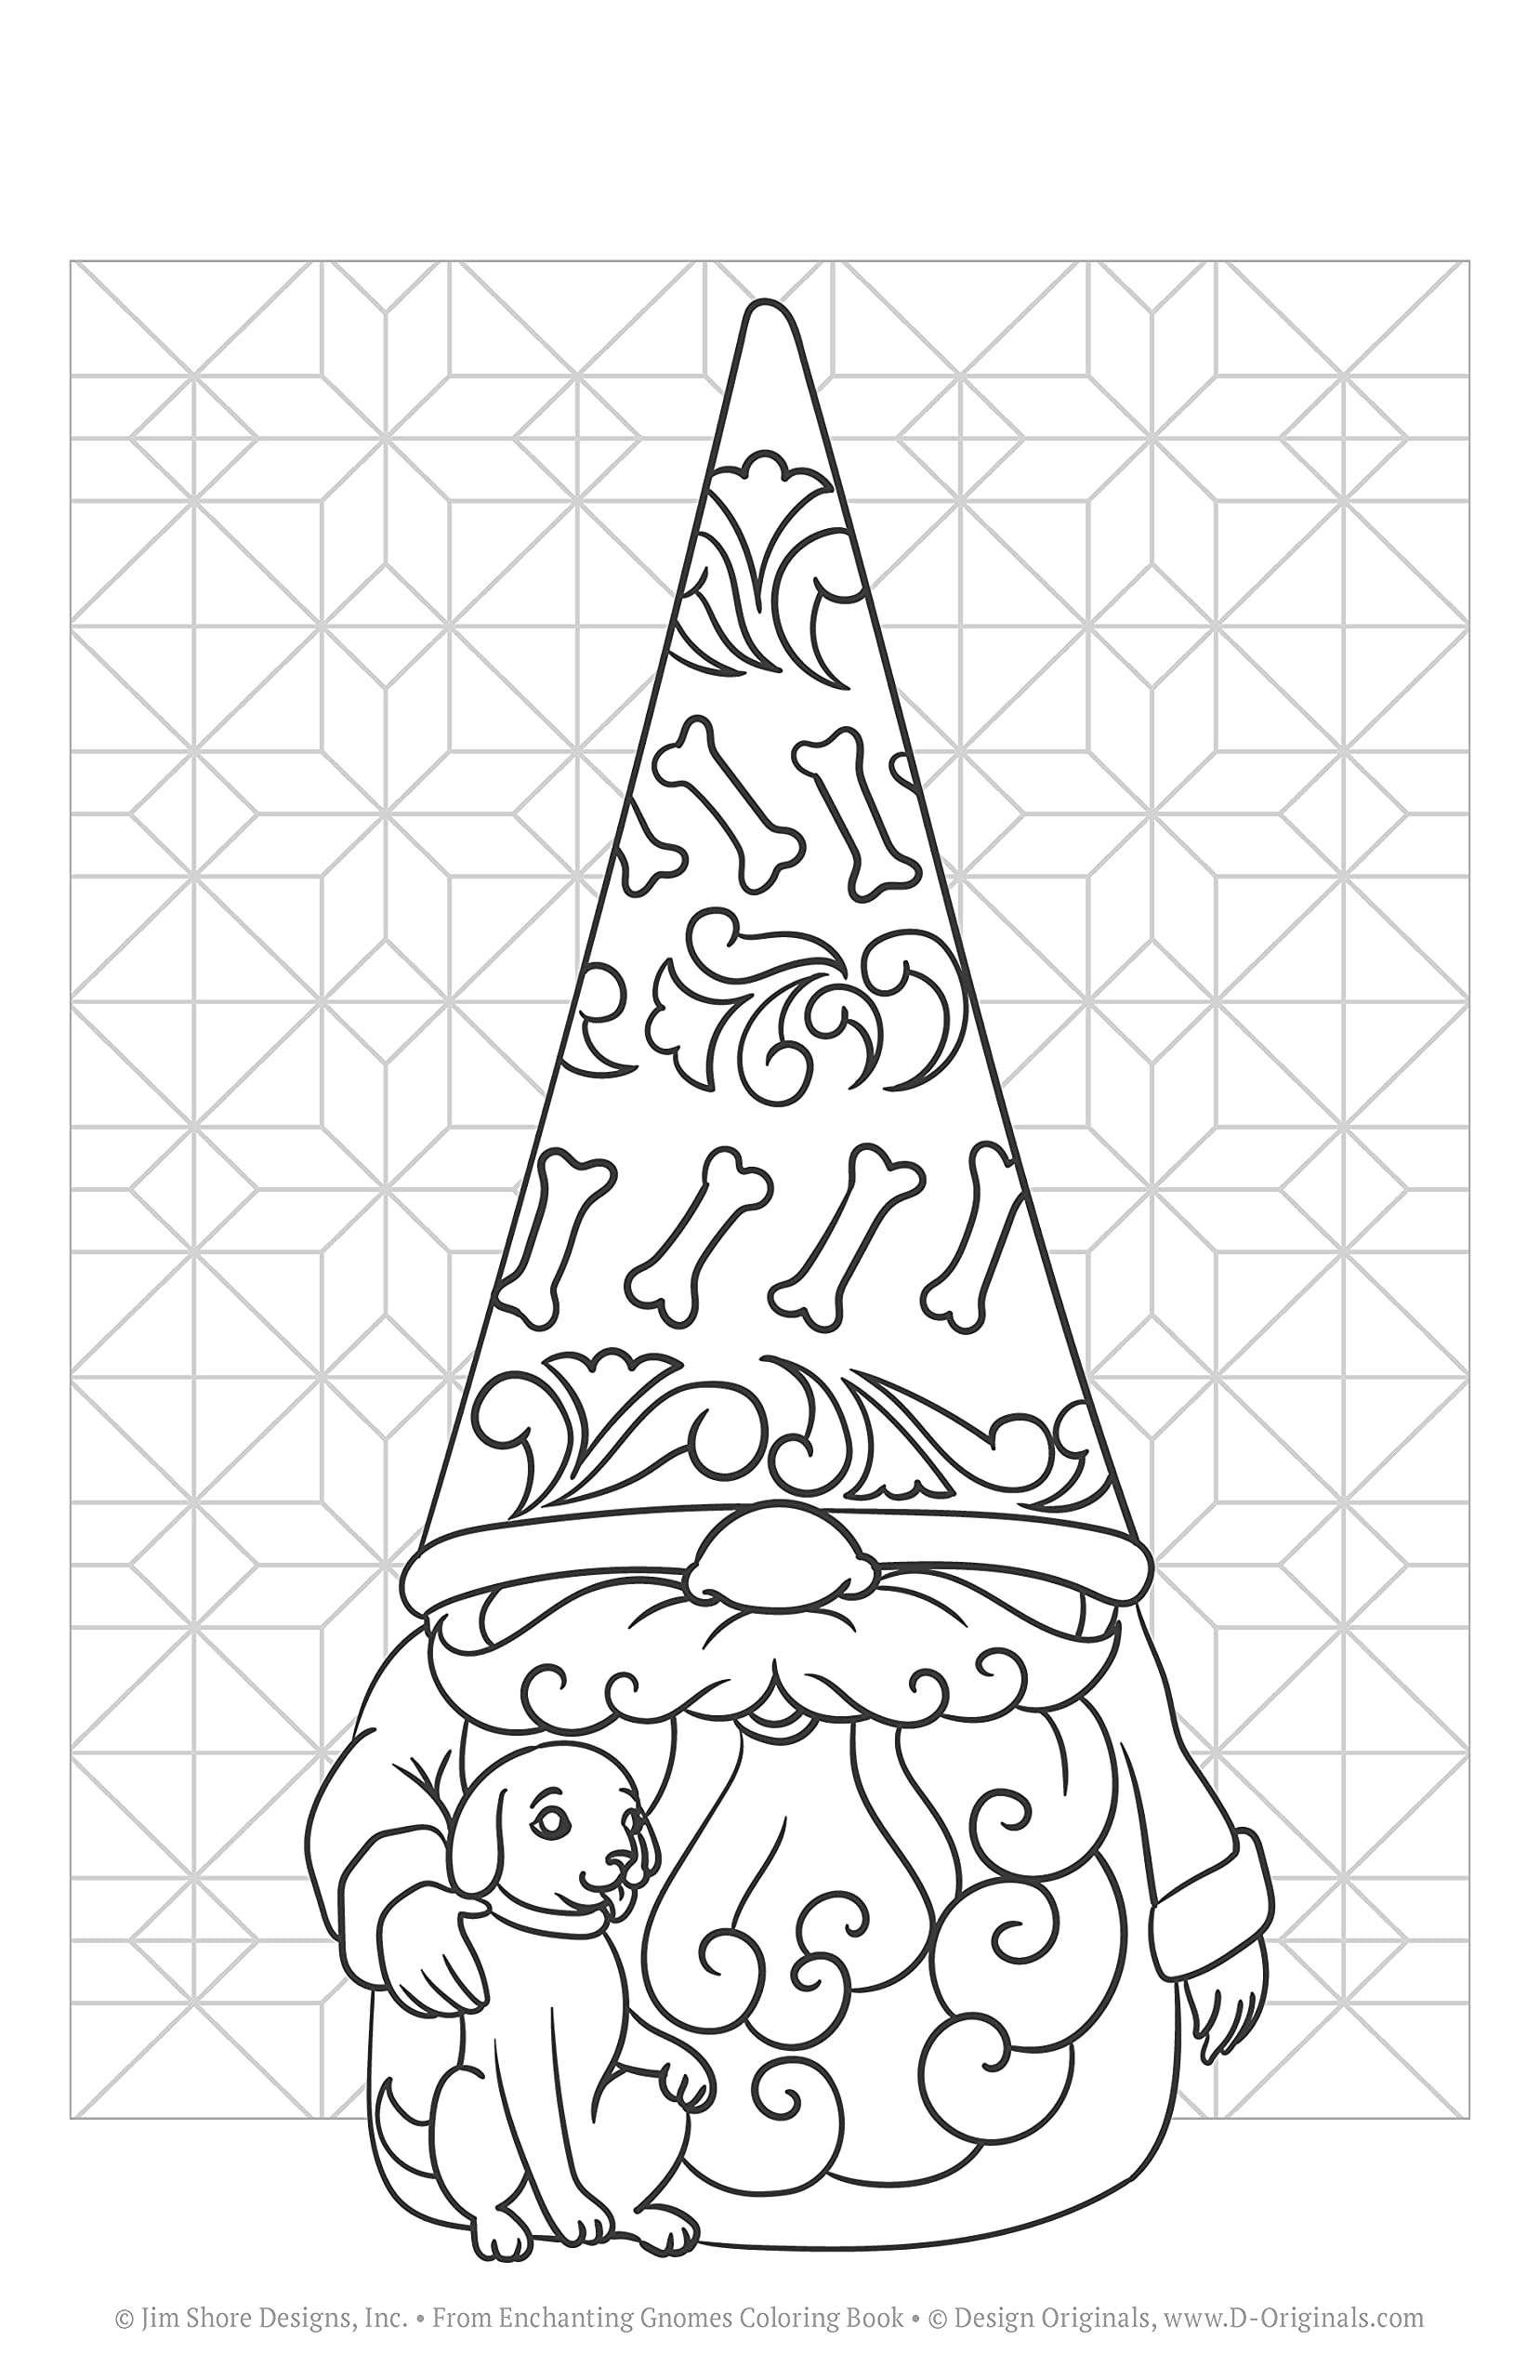 Amazon.com: Jim Shore Enchanting Gnomes Coloring Book: An Inspirational  Collection of Whimsical Characters (Design Originals) 8x5 Spiral Adult Coloring  Book - 32 Folk-Art Inspired Designs on Perforated Paper: 9781497205840: Jim  Shore: Books